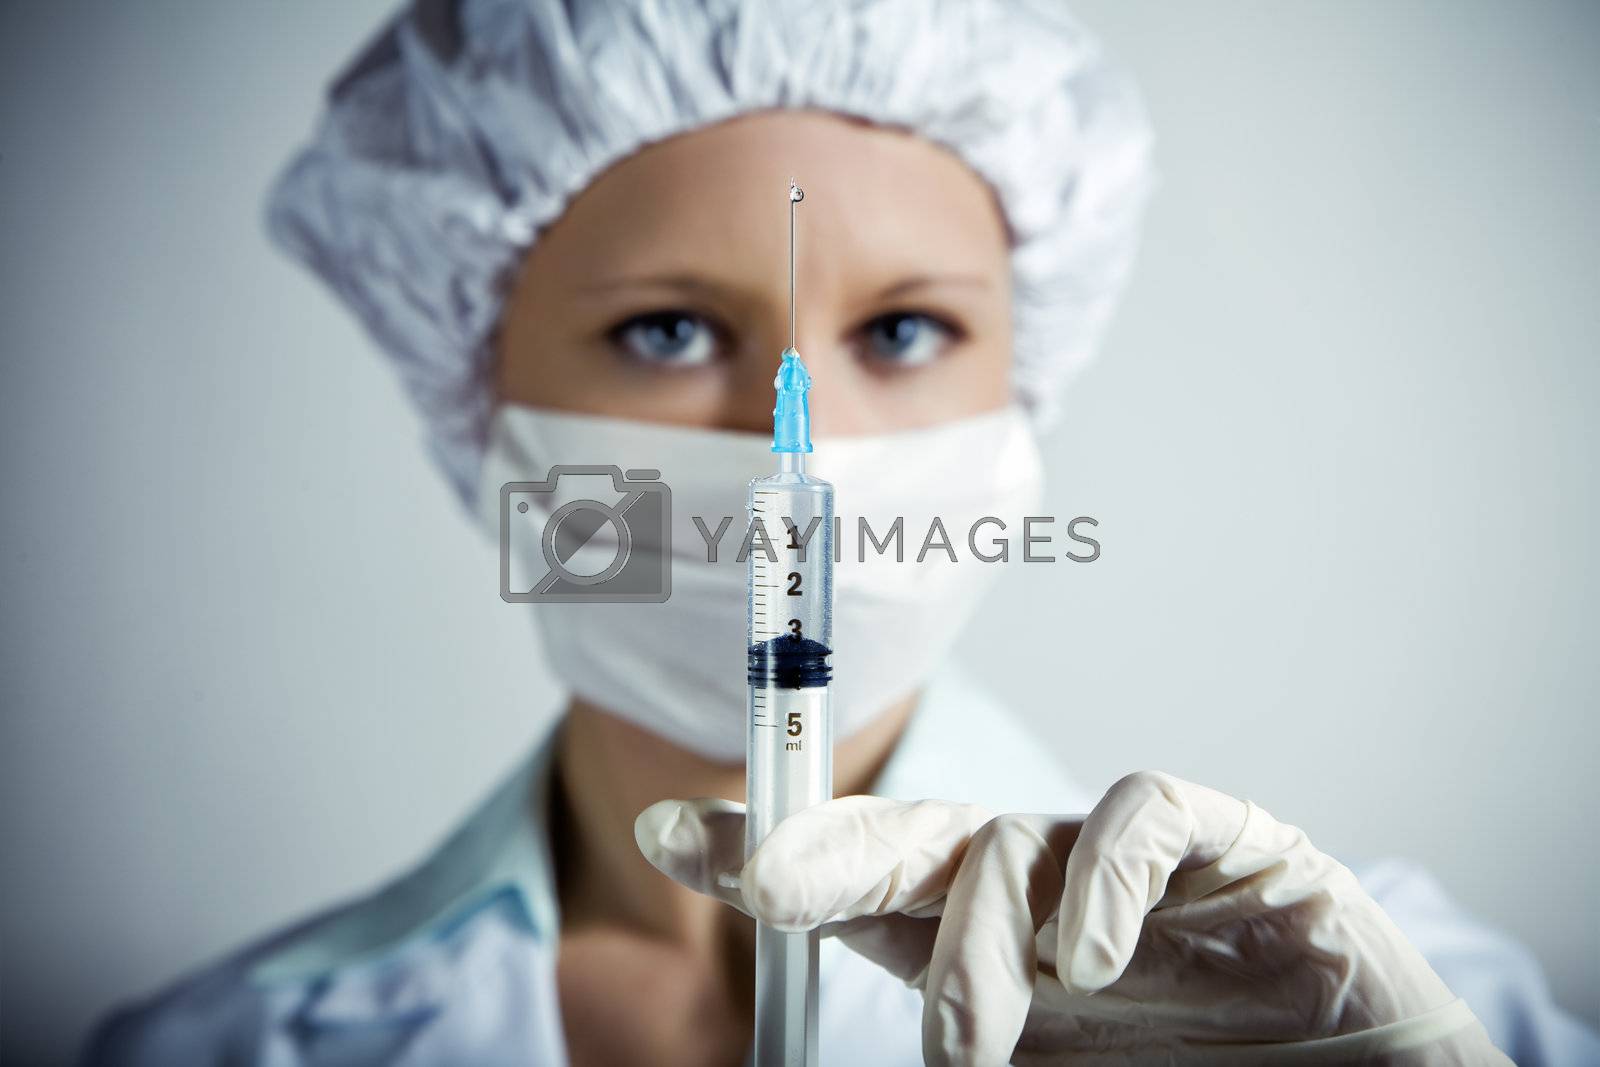 Royalty free image of healthcare by diego_cervo